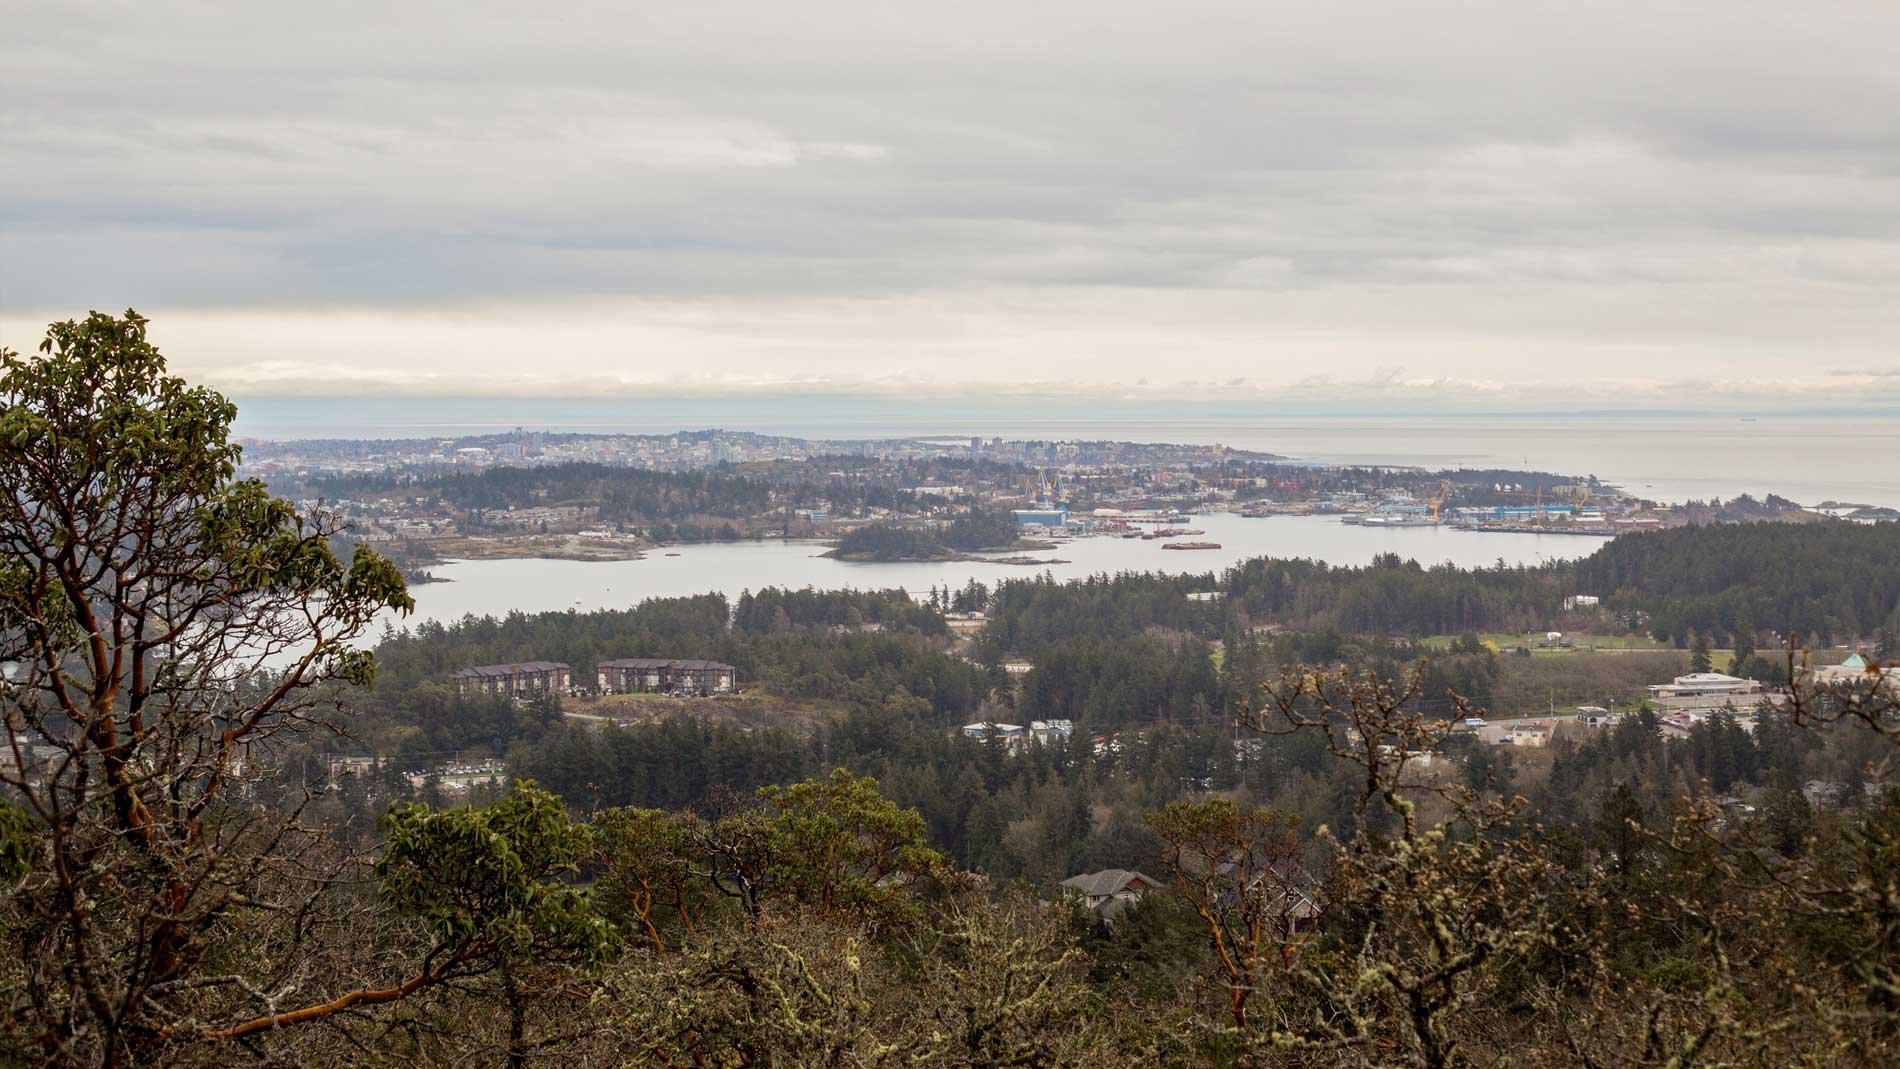 Seaside view of Victoria city from Mill Hill in Colwood, British Columbia.